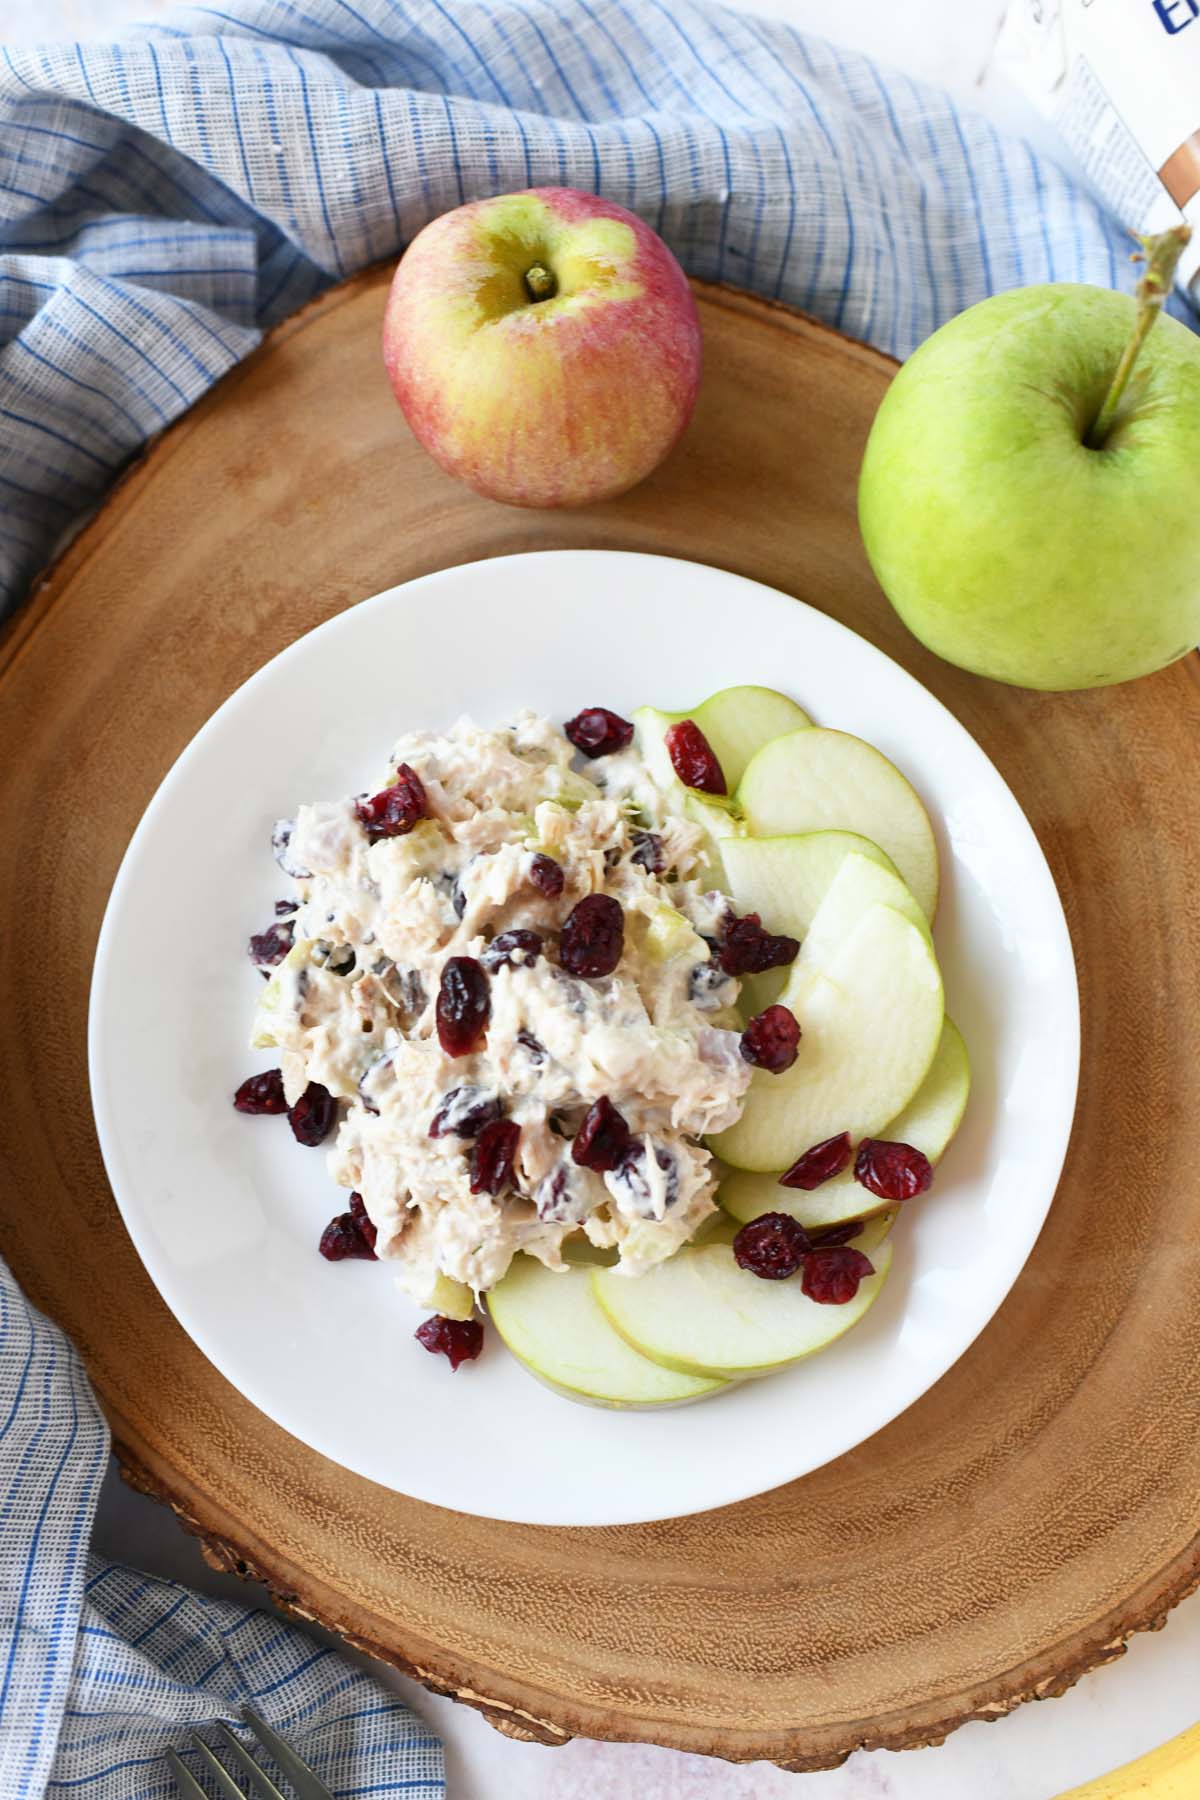 Tuna salad with apples on a white plate.